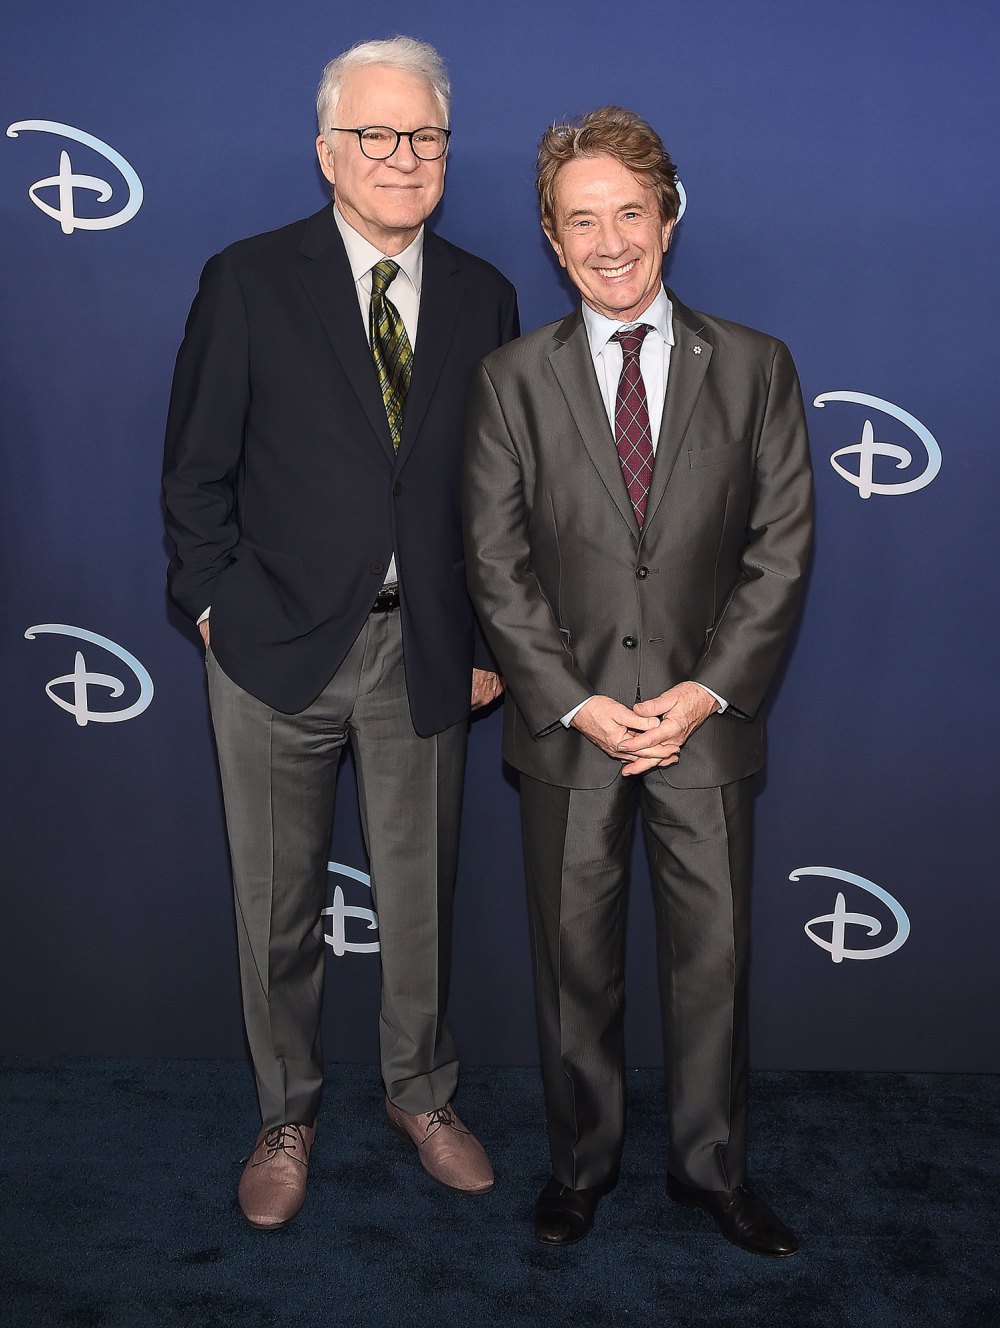 Steve Martin and Martin Short Compare Their Friendship to GMA3 TJ Holmes and Amy Robach